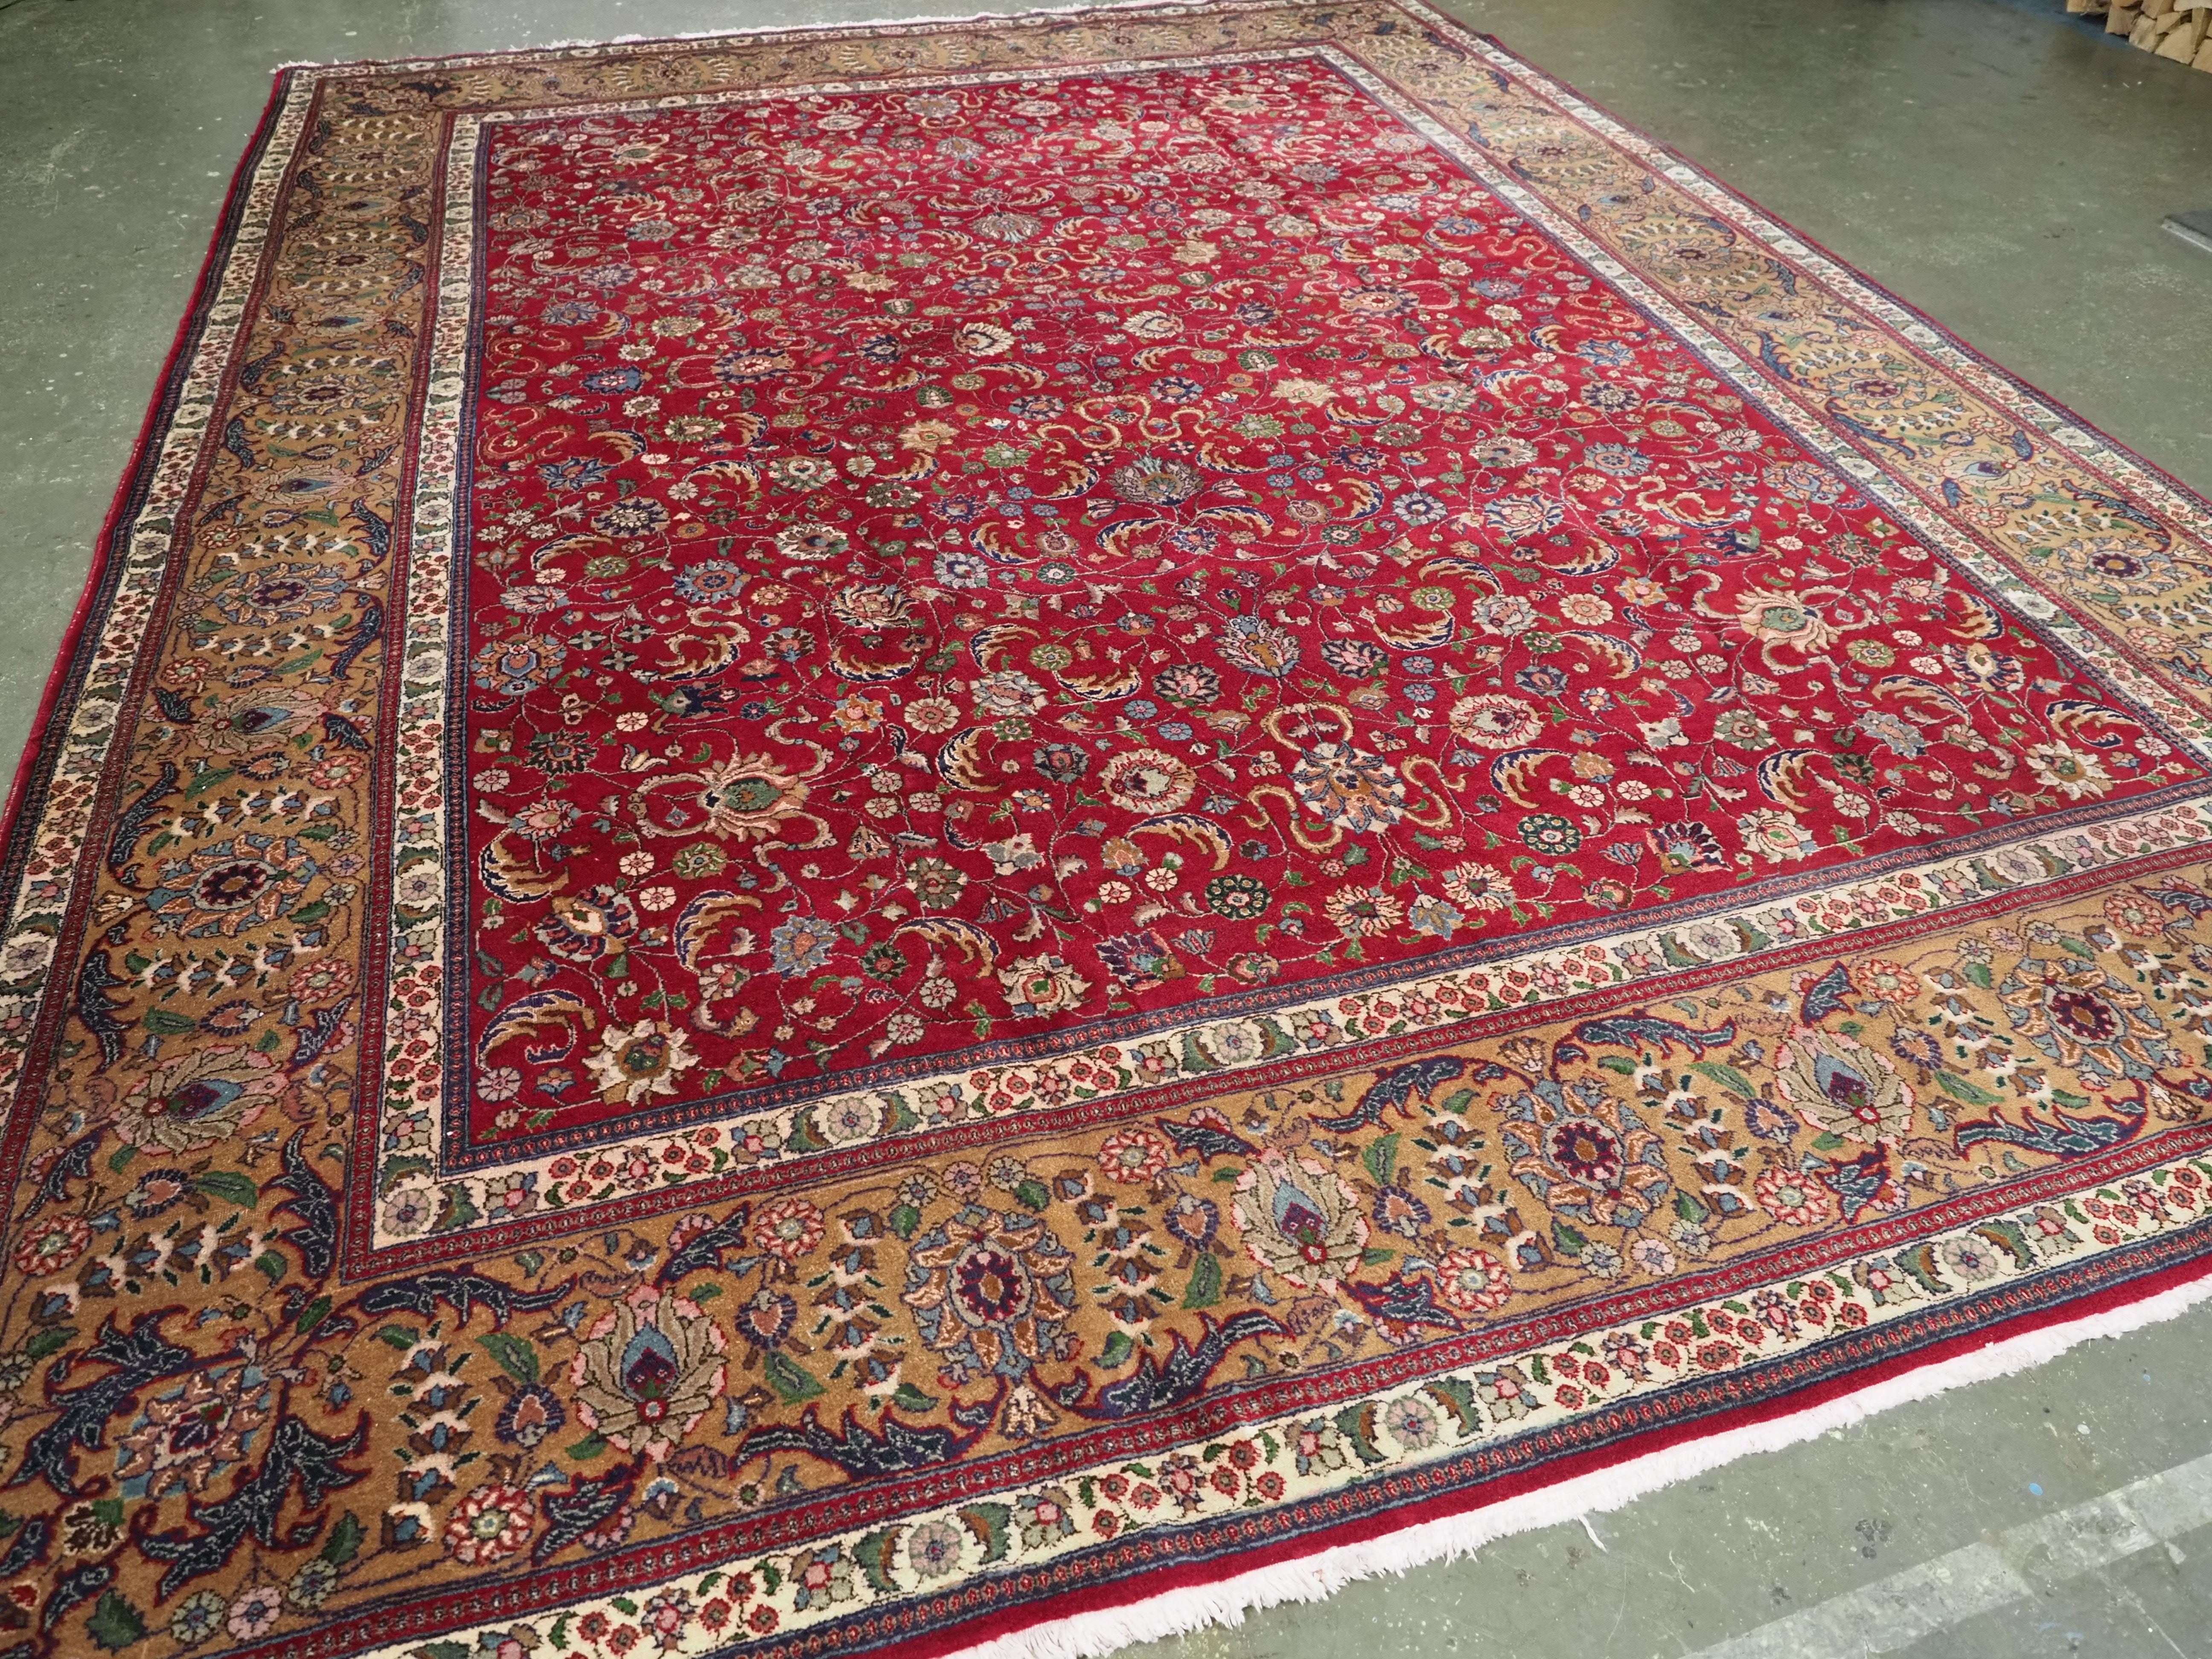 Size: 14ft 11in x 11ft 0in (455 x 336cm).

Vintage Persian Tabriz carpet of traditional all over design in a large room size.

Circa 1930.

A very good furnishing Tabriz carpet with a traditional all over floral design. The carpet has a good ruby